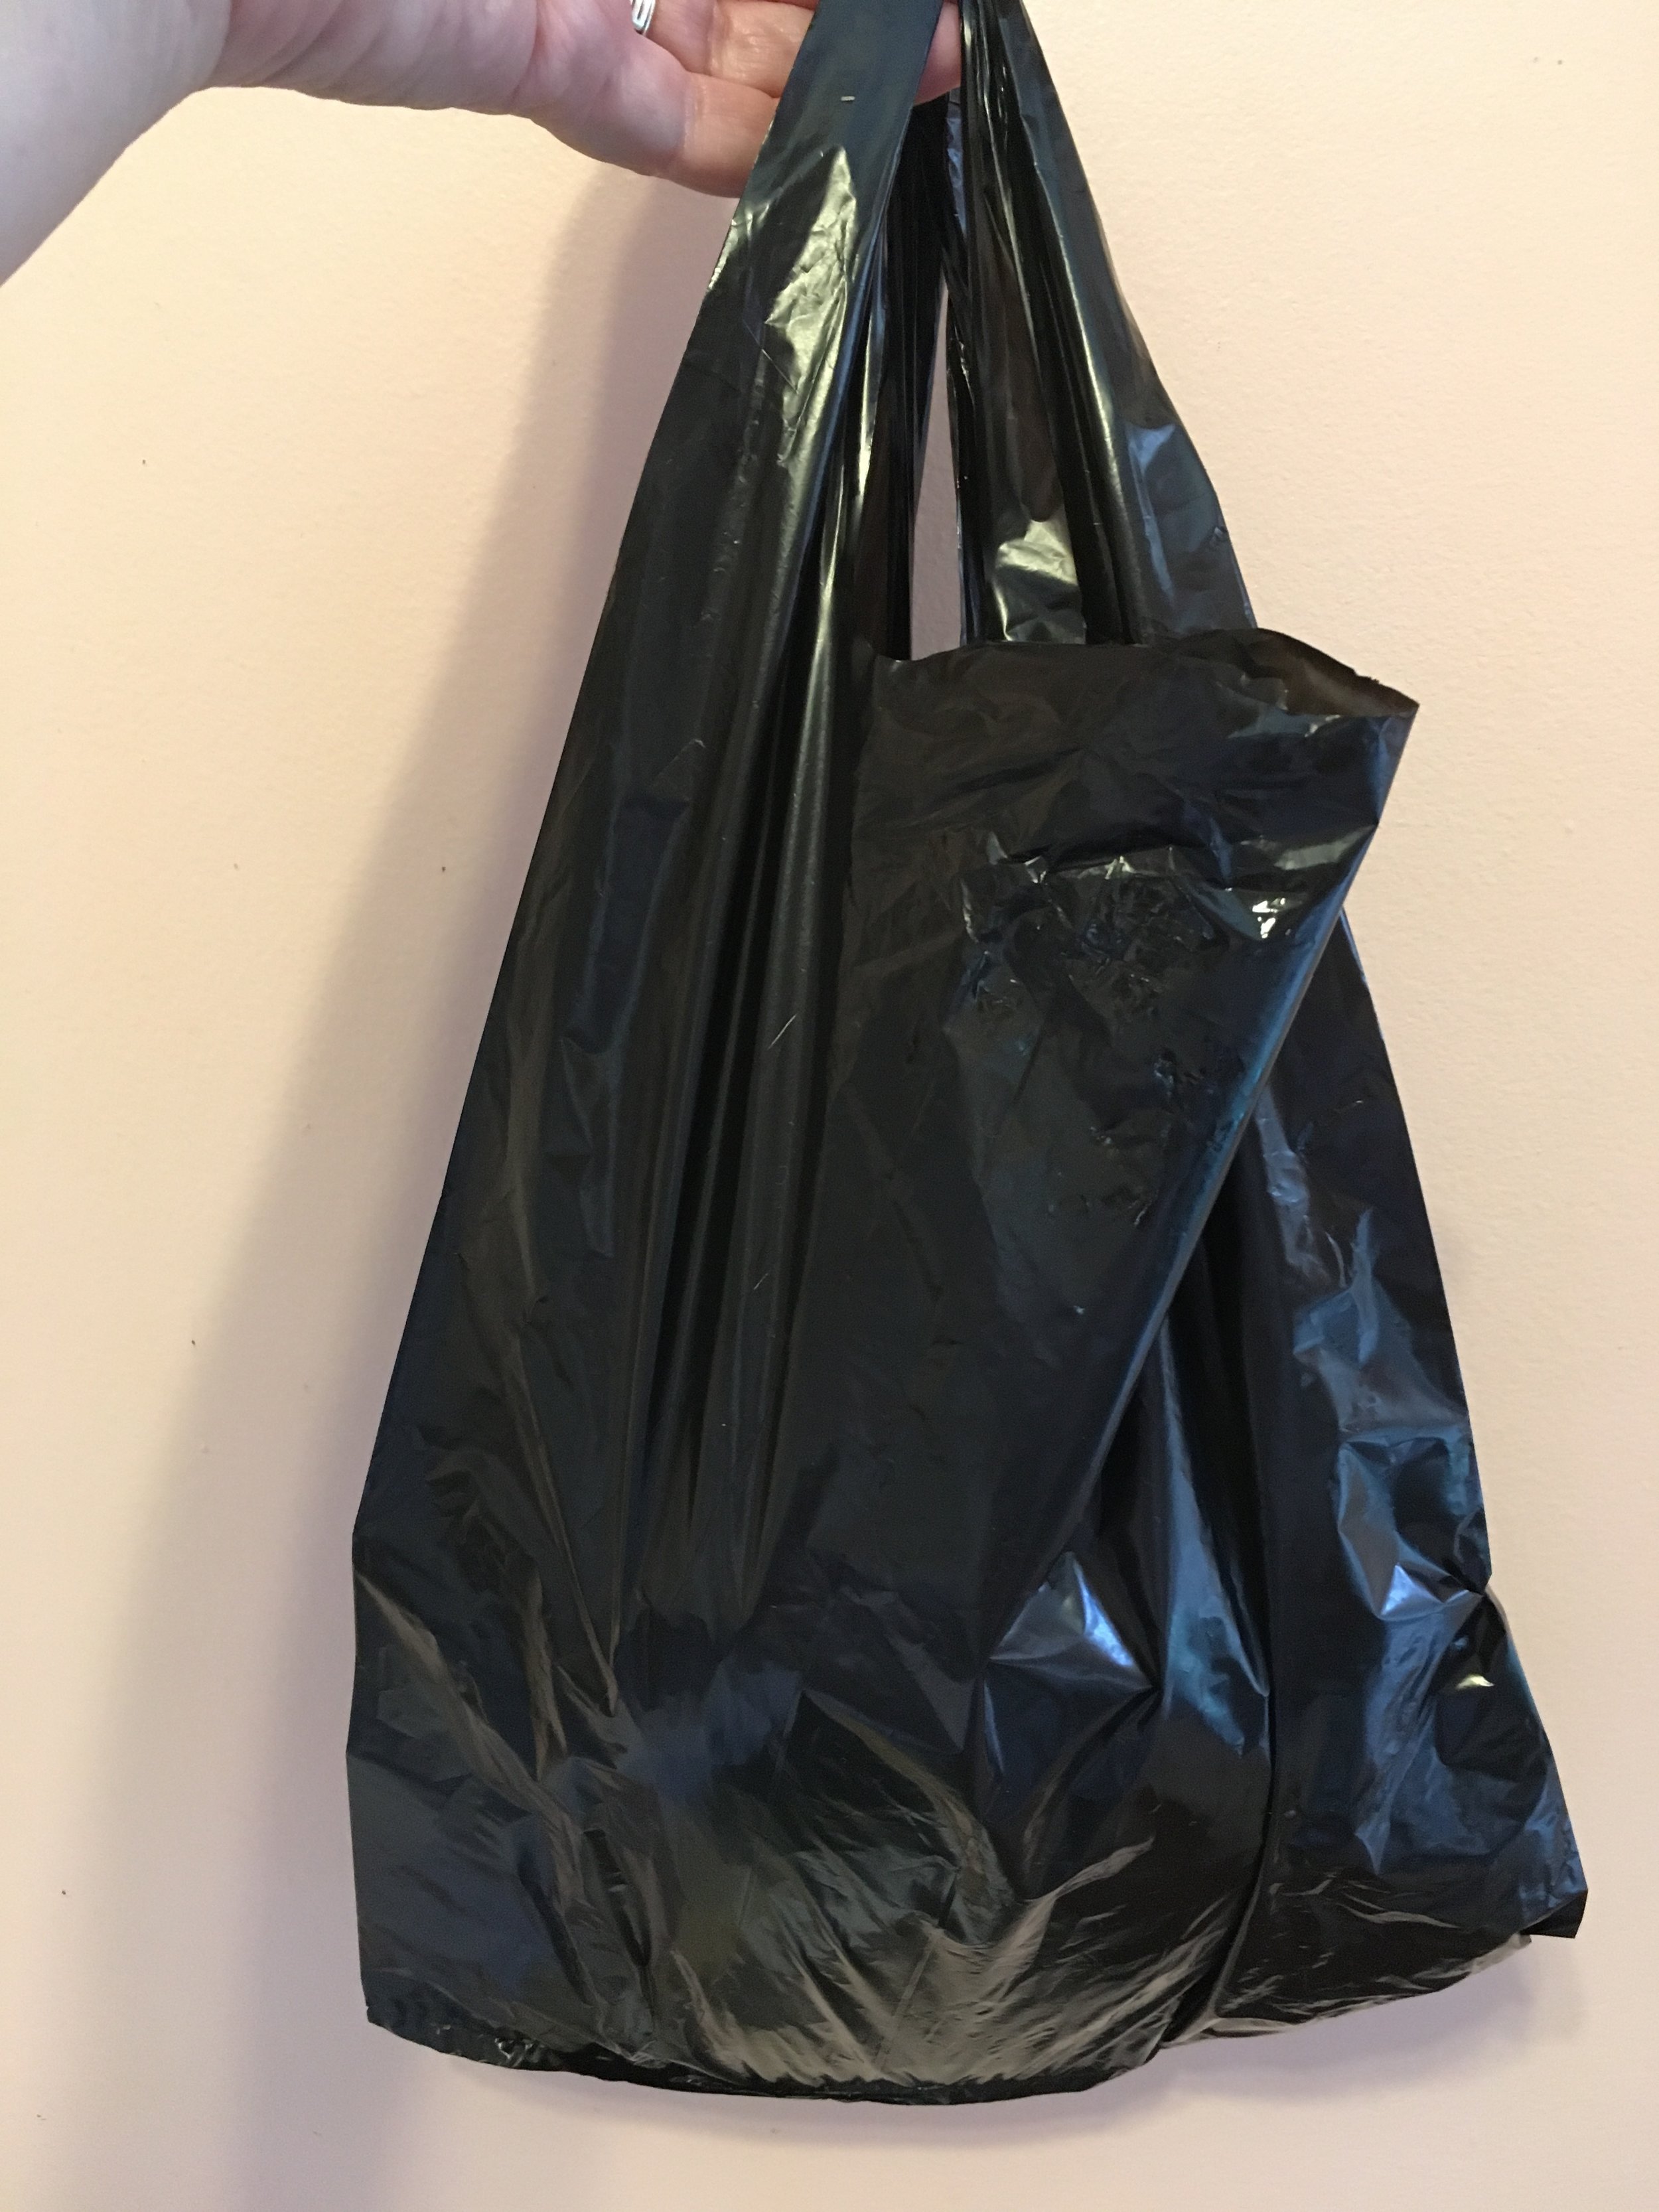 Aztecan tradition in a black plastic bag